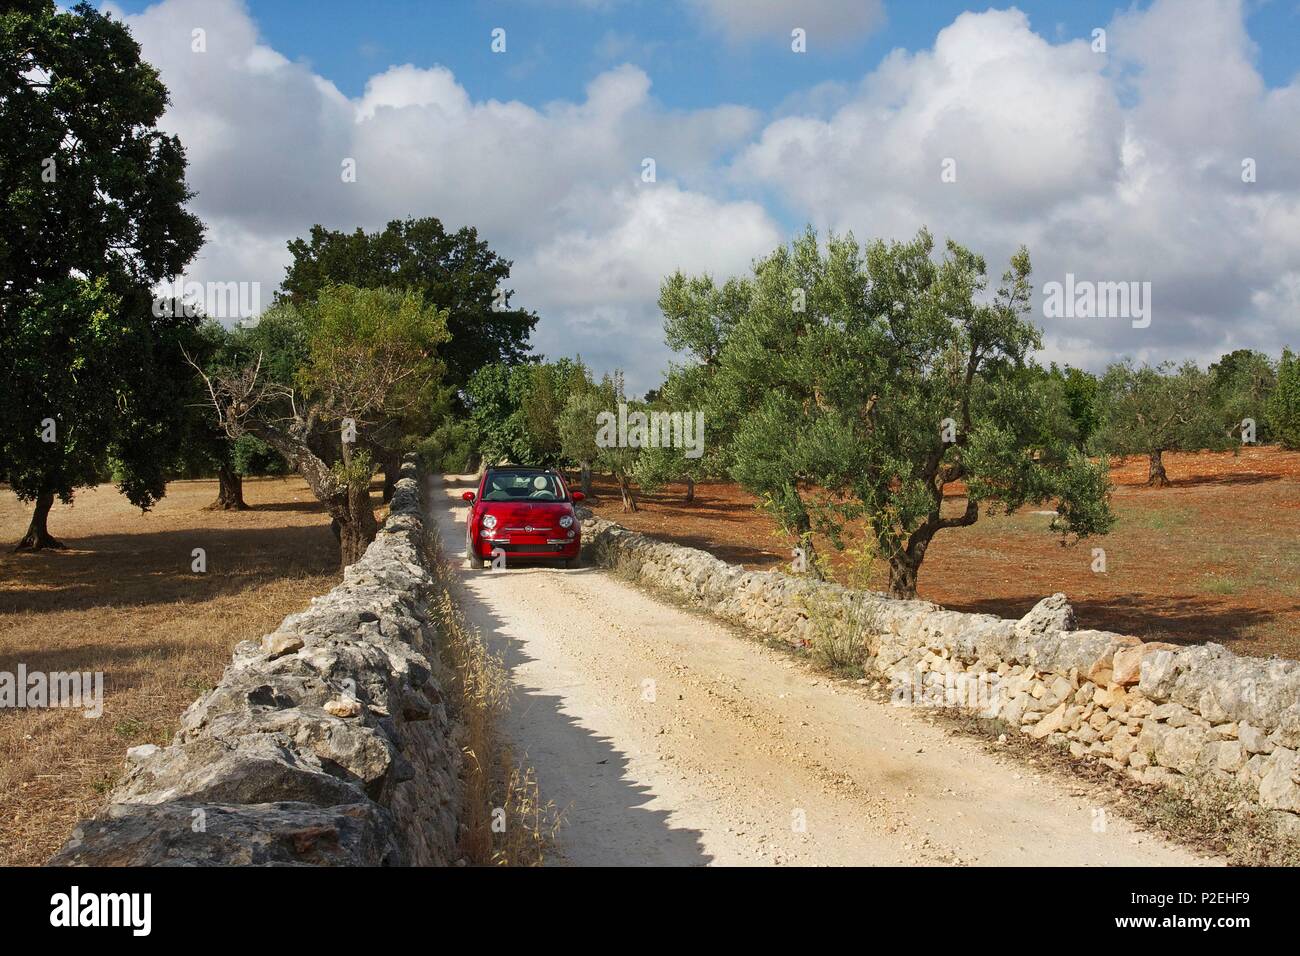 Italy, Puglia, Locorotondo, Fiat Cinquecento red on a country lane lined with muretti, low stone walls dry, in the middle of olive trees Stock Photo